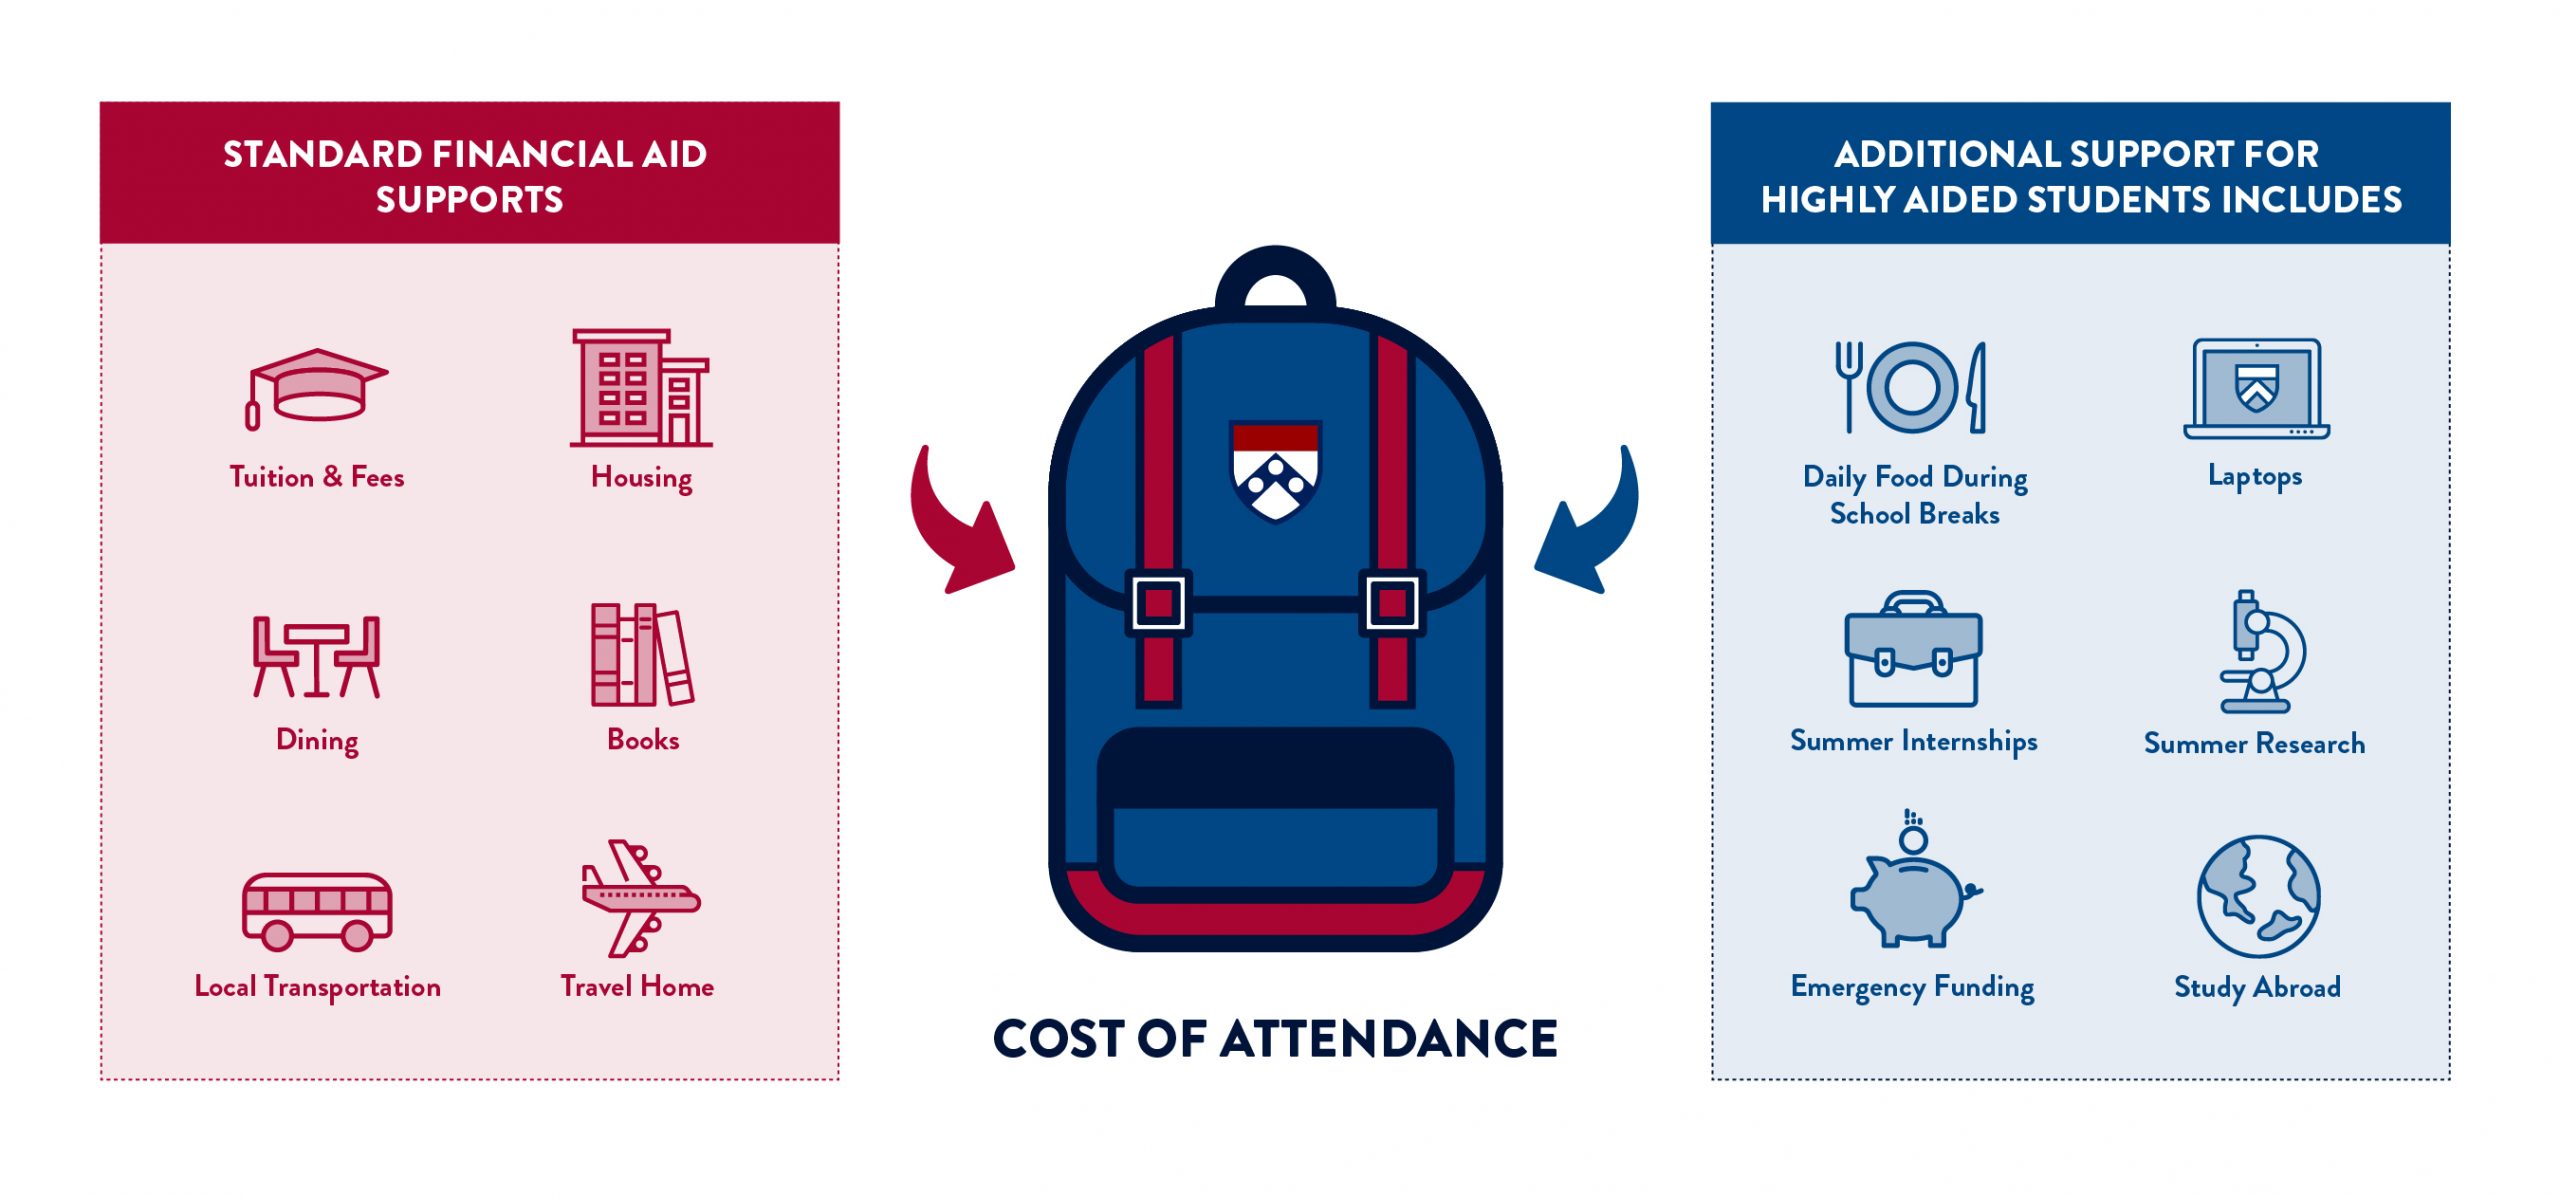 Cost of Attendance Infographic showing difference between standard financial aid support and additional support for highly aided students